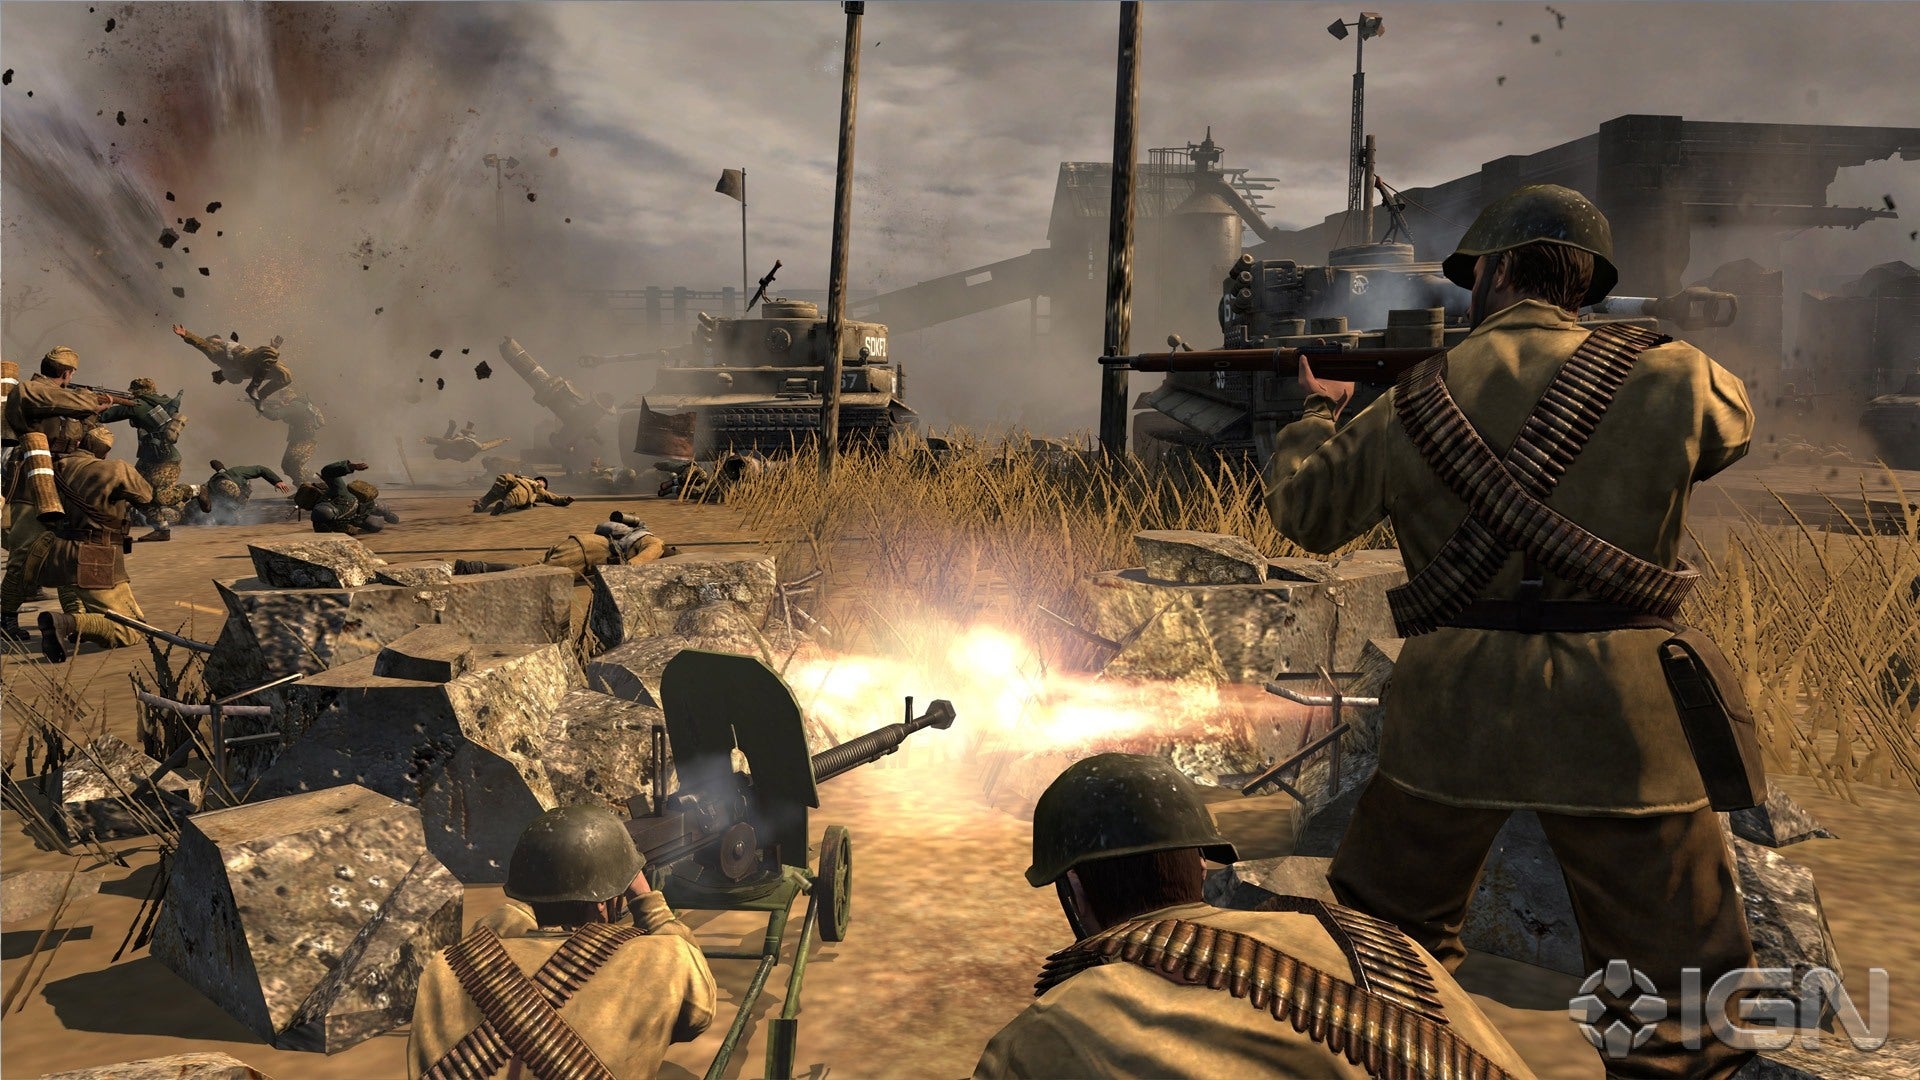 company of heroes wallpaper,action adventure game,strategy video game,pc game,shooter game,battle